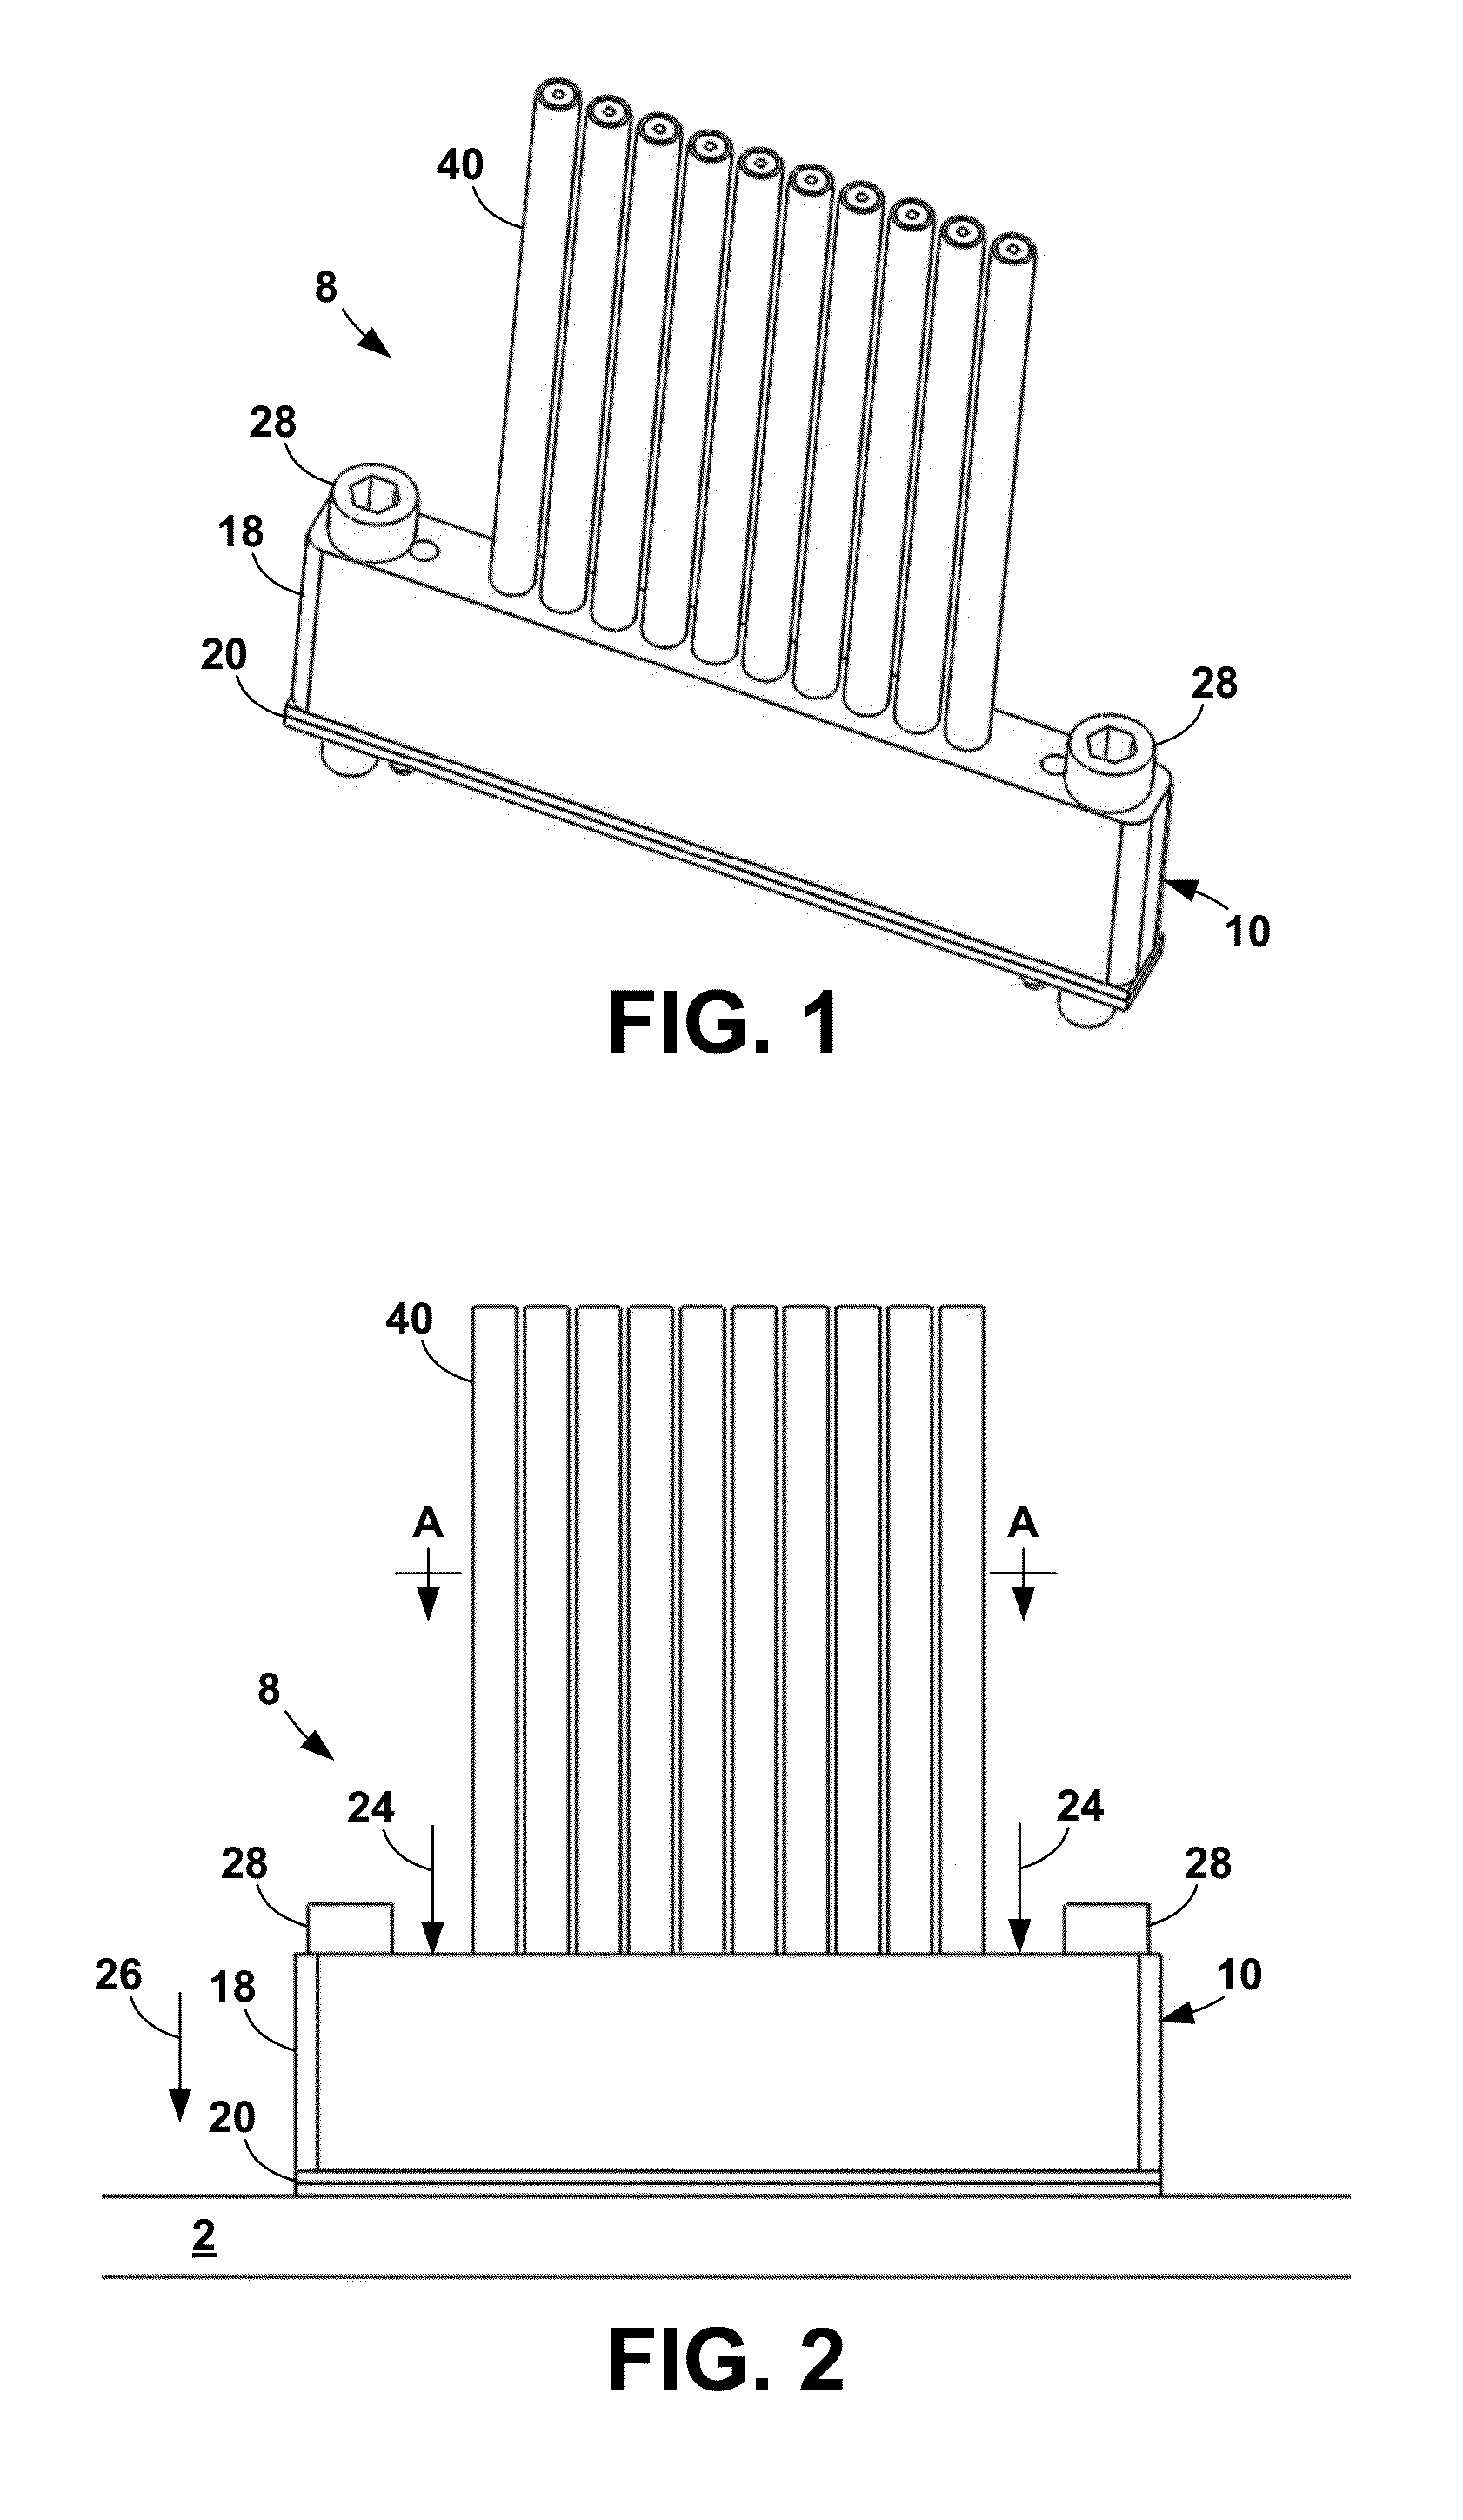 Controlled-Impedance Cable Termination with Compensation for Cable Expansion and Contraction